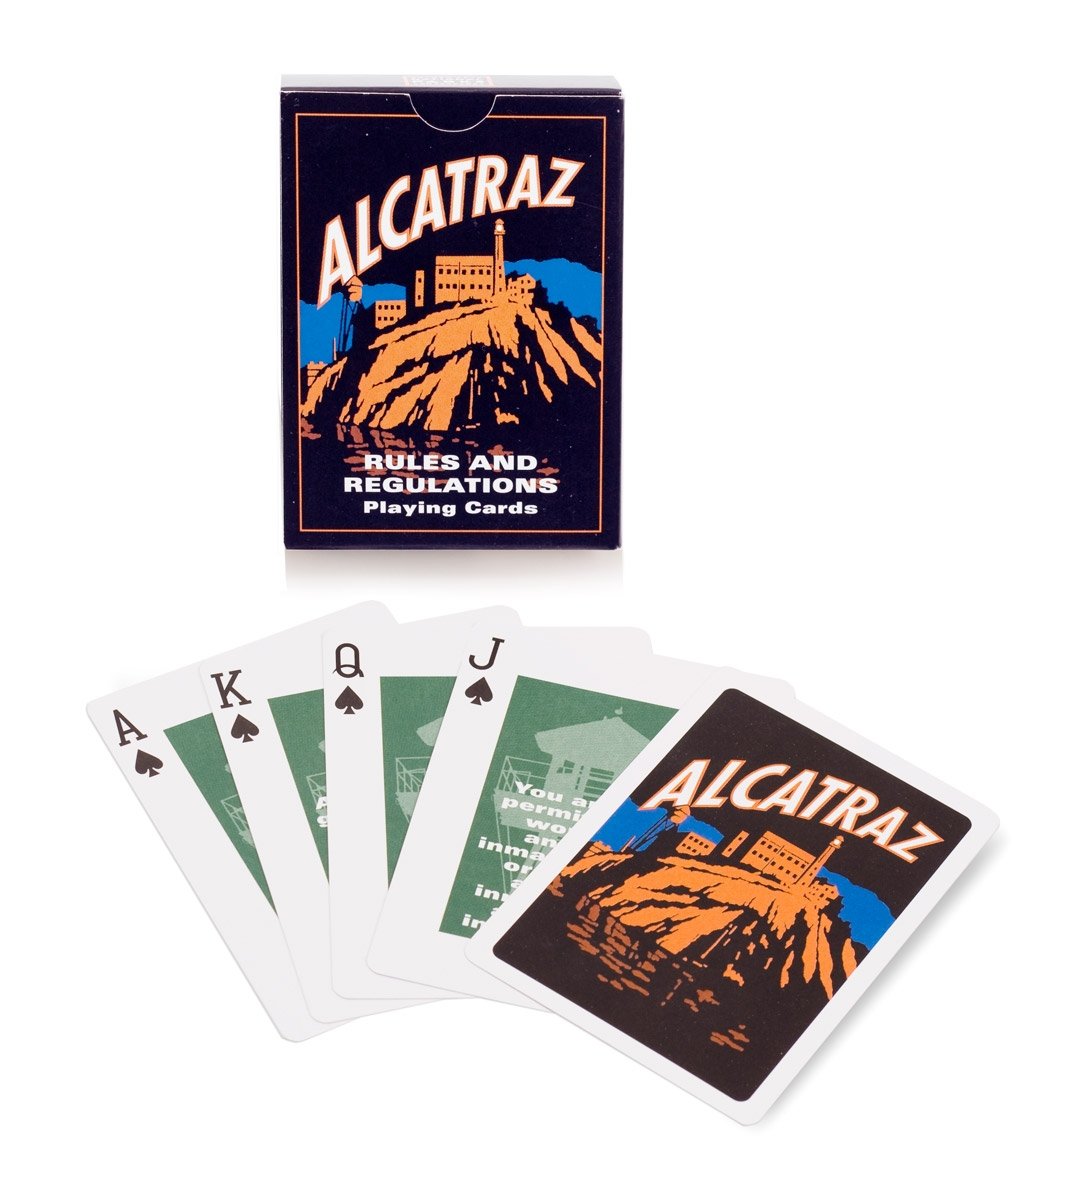 Alcatraz Rules and Regulation playing cards, featuring 52 of the Rock's notoriously restrictive rules and regulations.